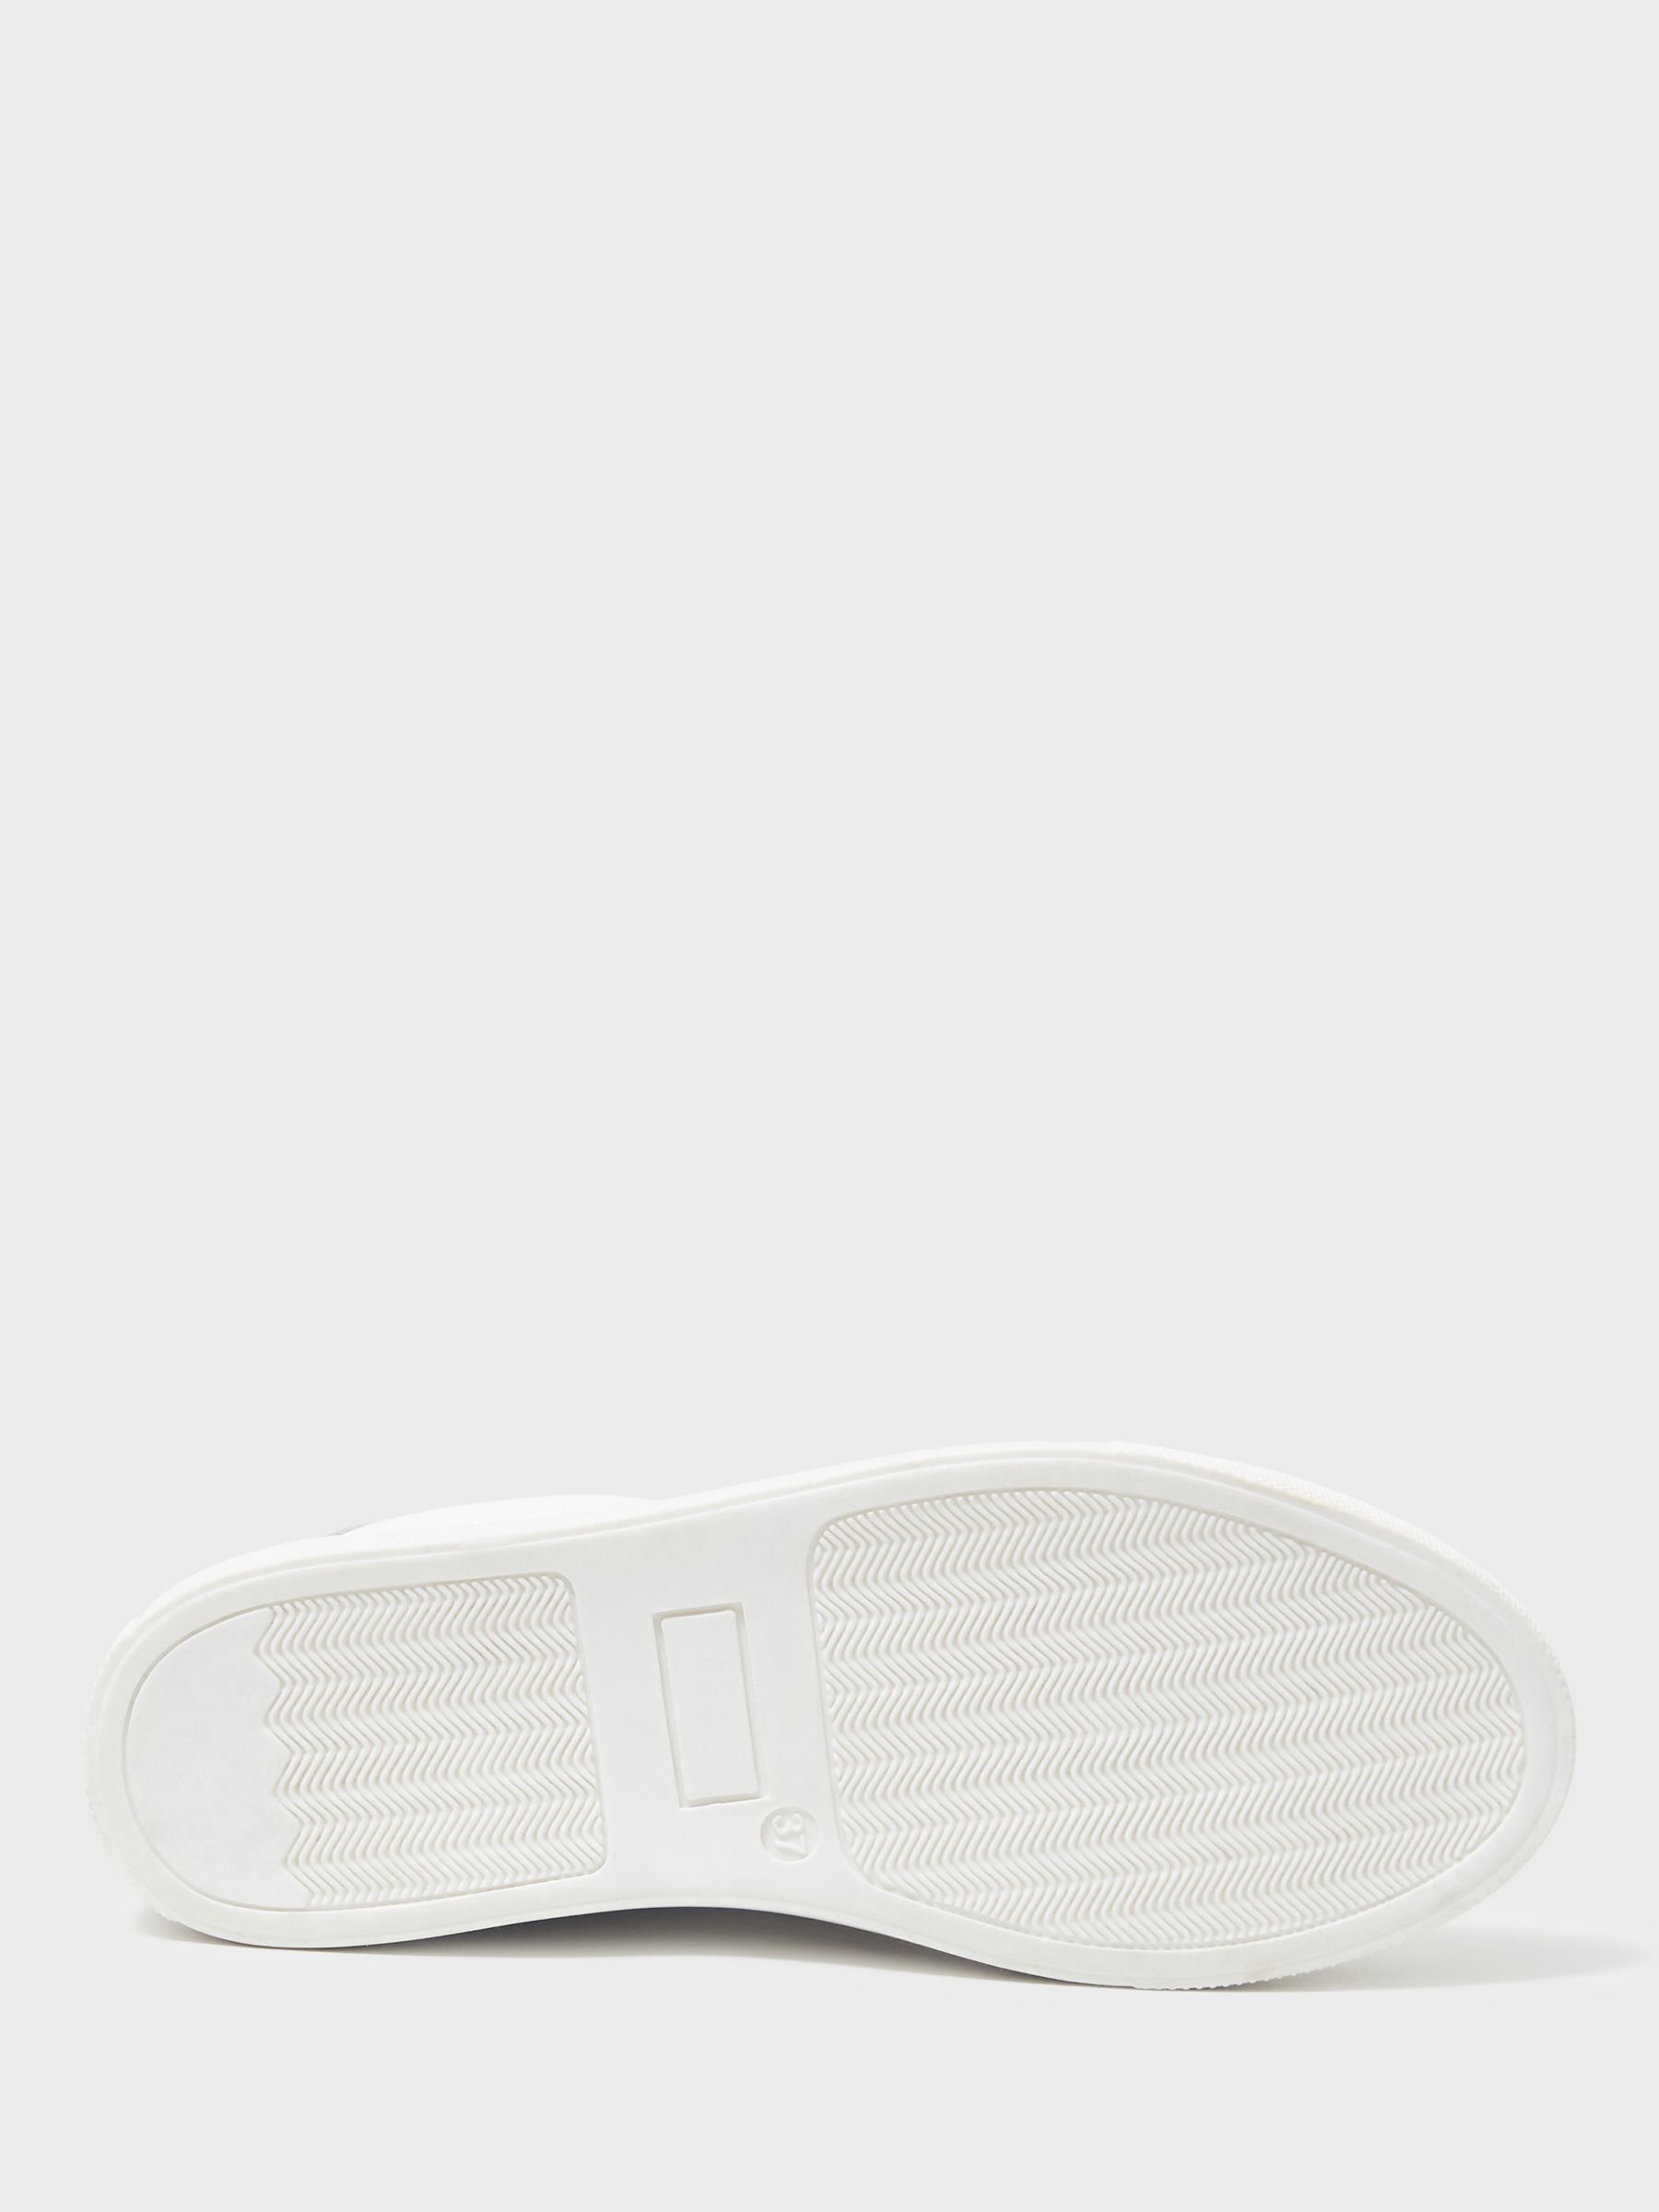 Buy Crew Clothing Gigi Leather Trainers, White Online at johnlewis.com